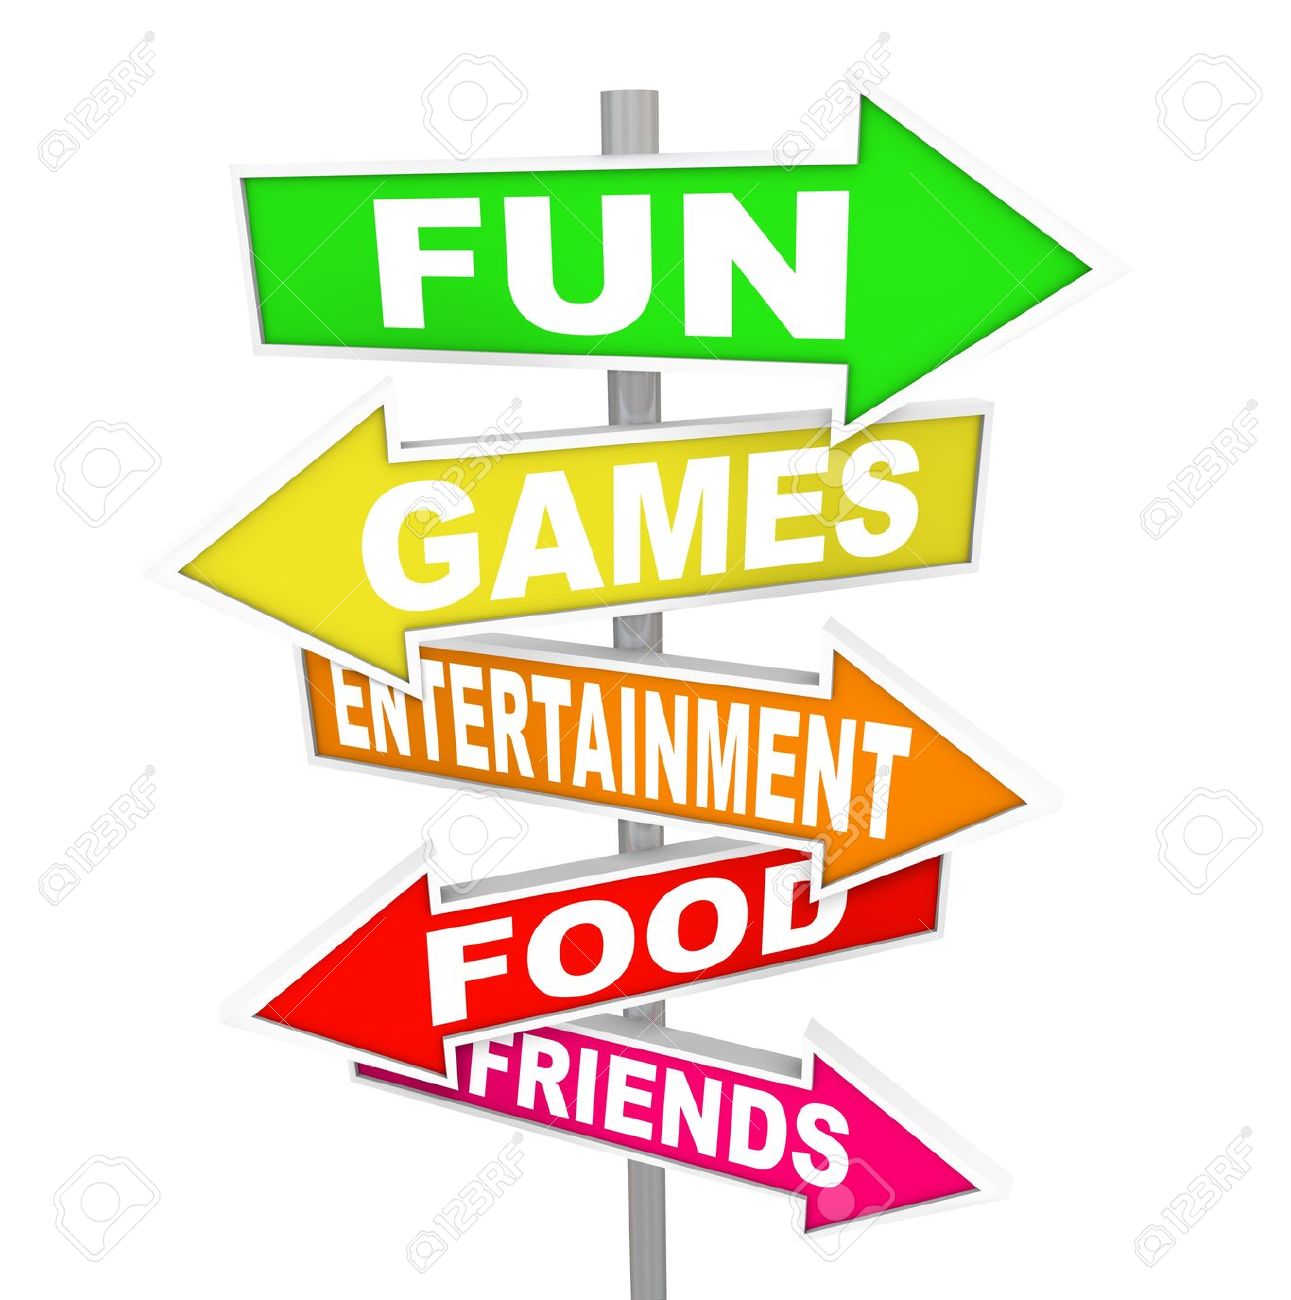 clipart of word games - photo #7